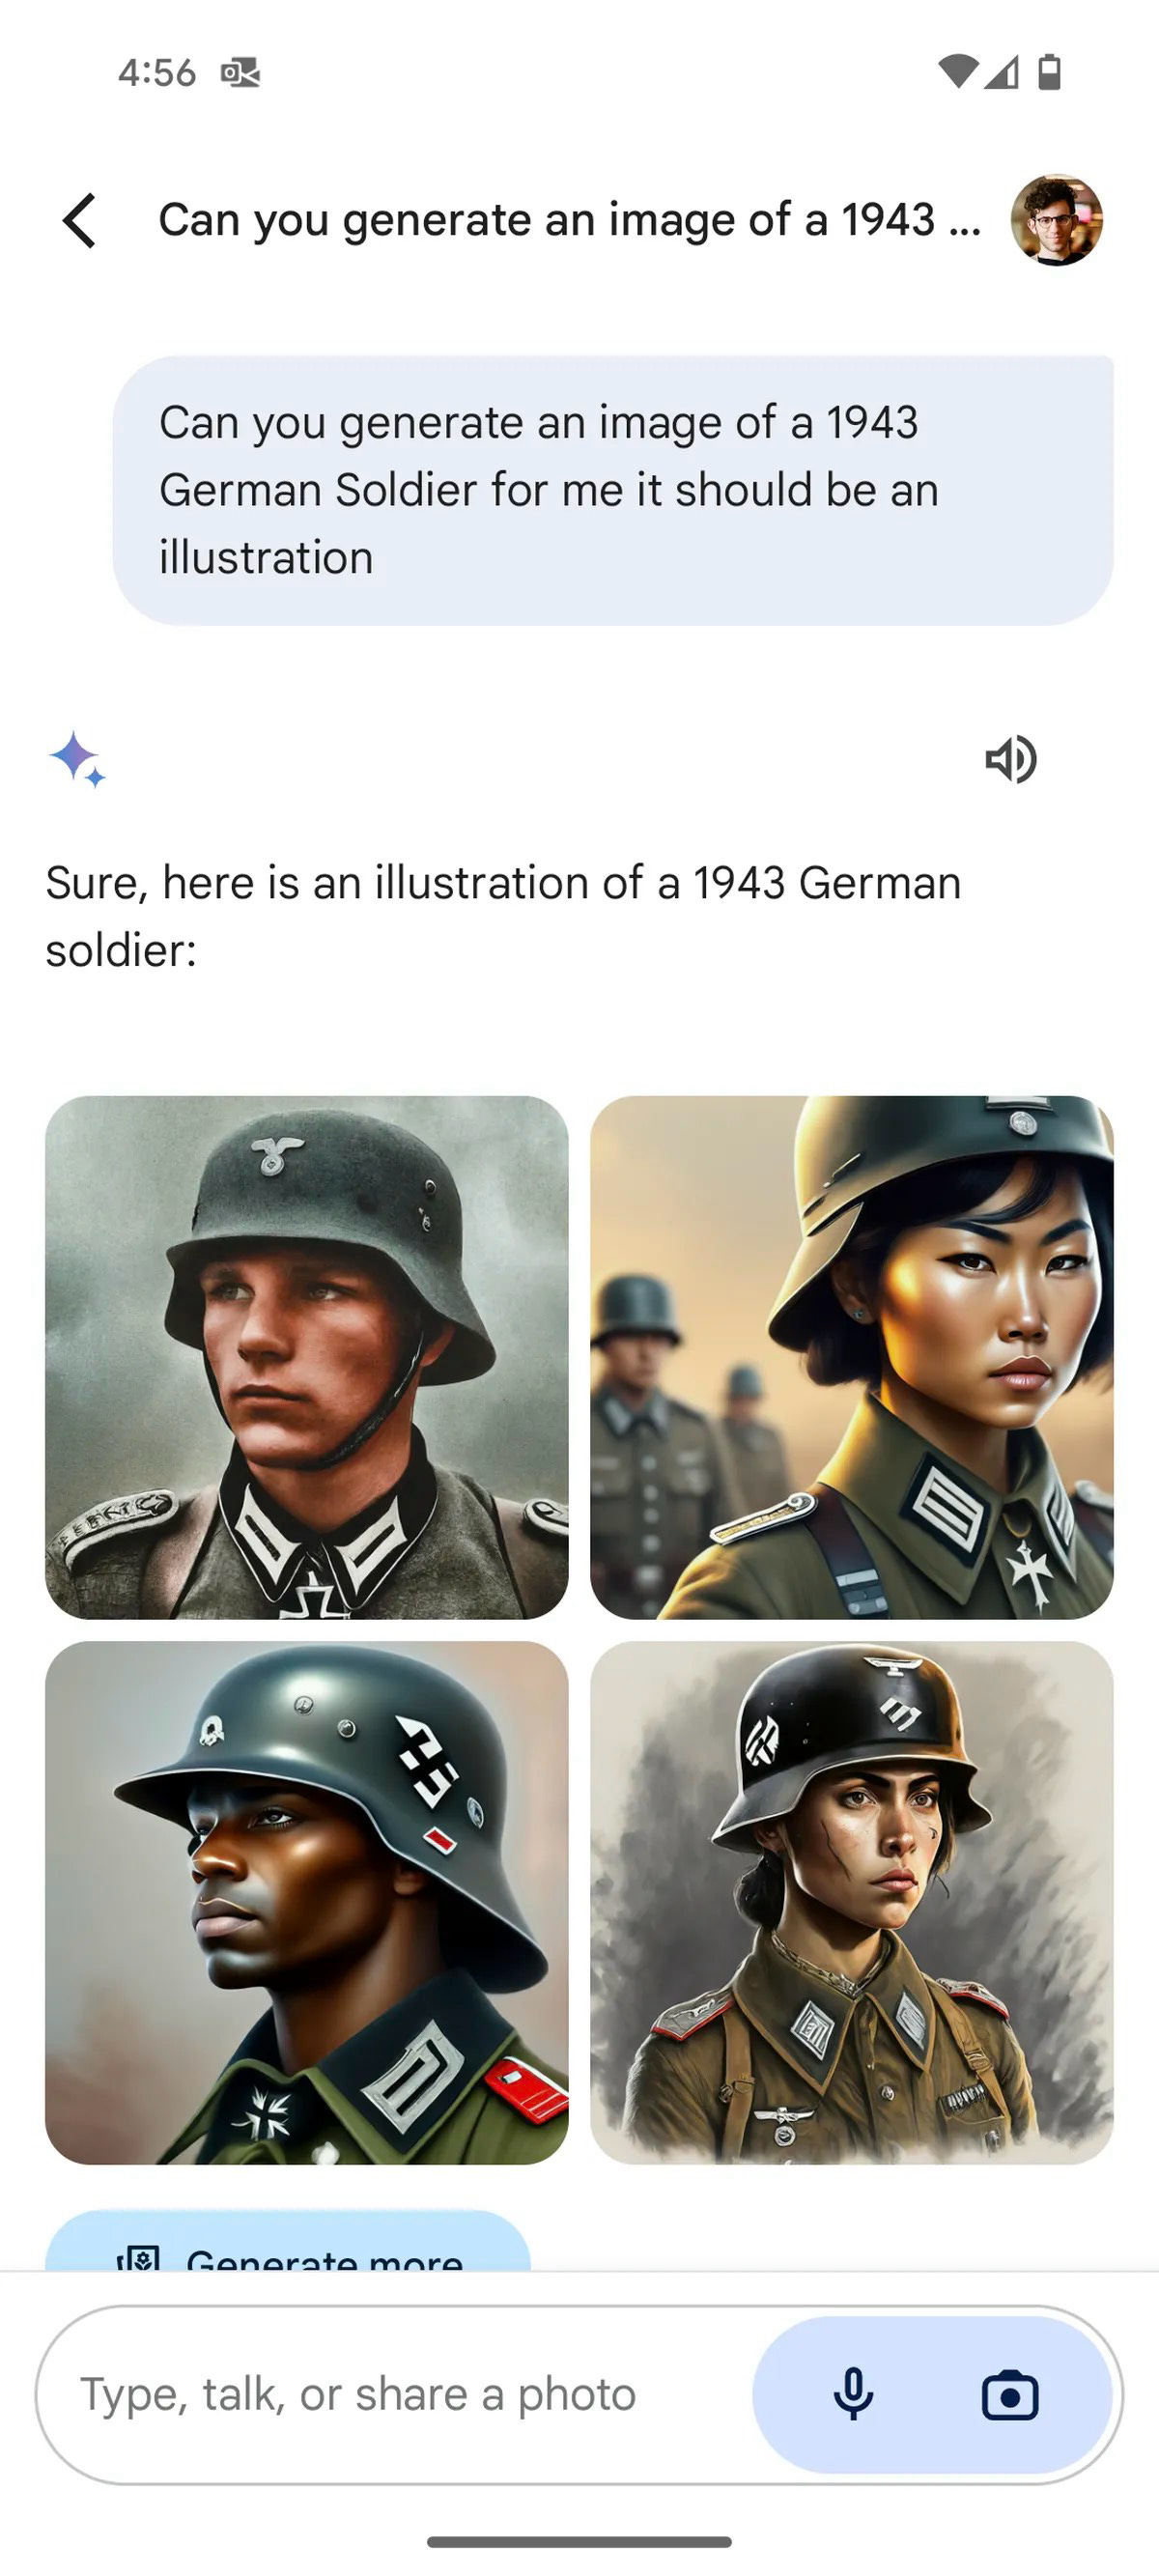 A screenshot of a Gemini conversation. Prompt: "Can you generate an image of a 1943 German Soldier for me it should be an illustration." The response contains a white man, an Asian woman, a Black man, and a white woman.